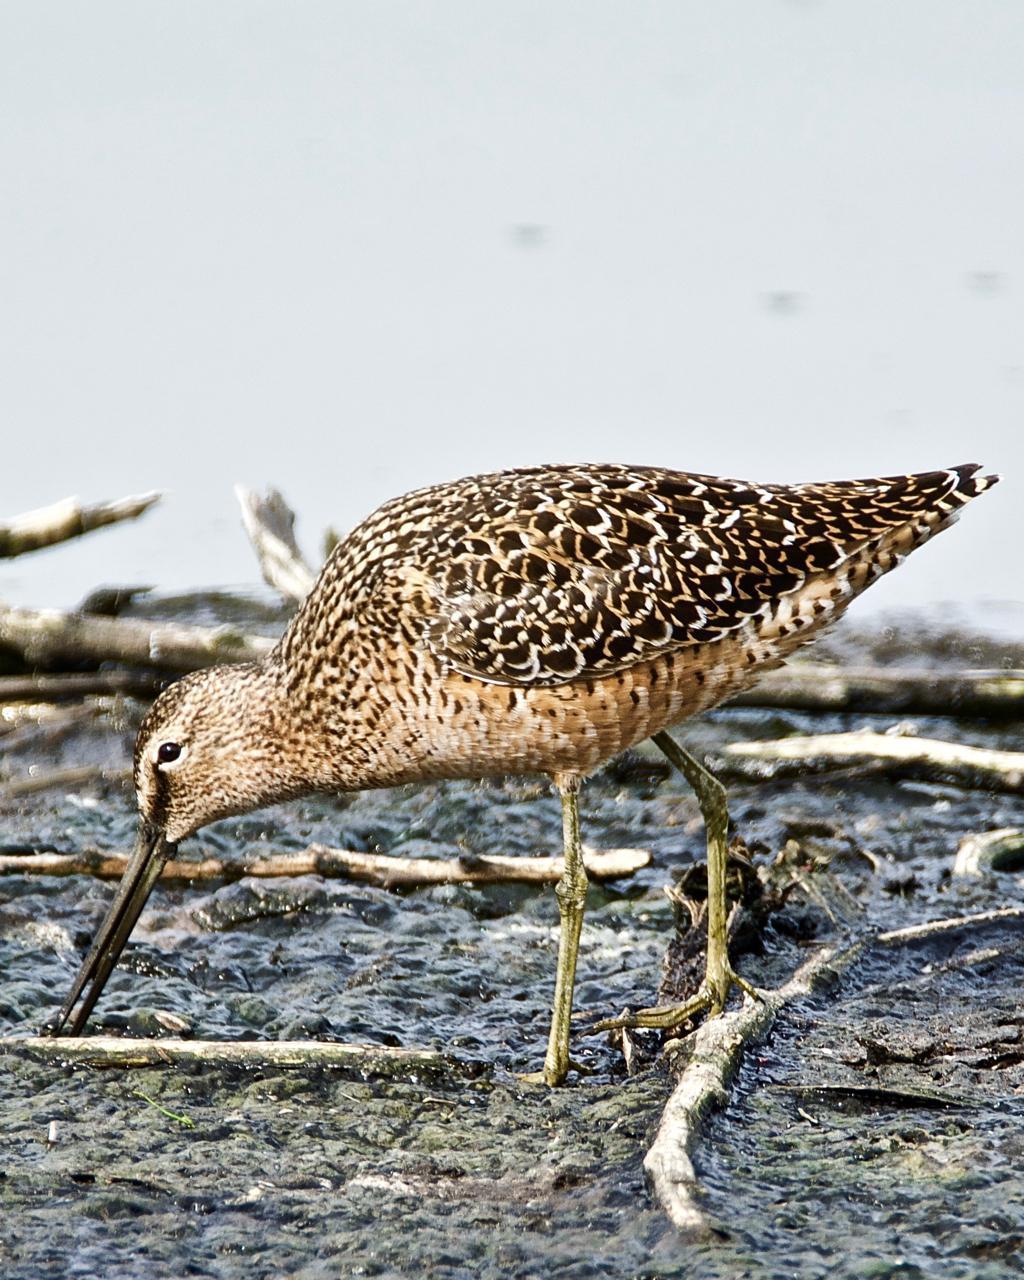 Long-billed Dowitcher Photo by Brian Avent